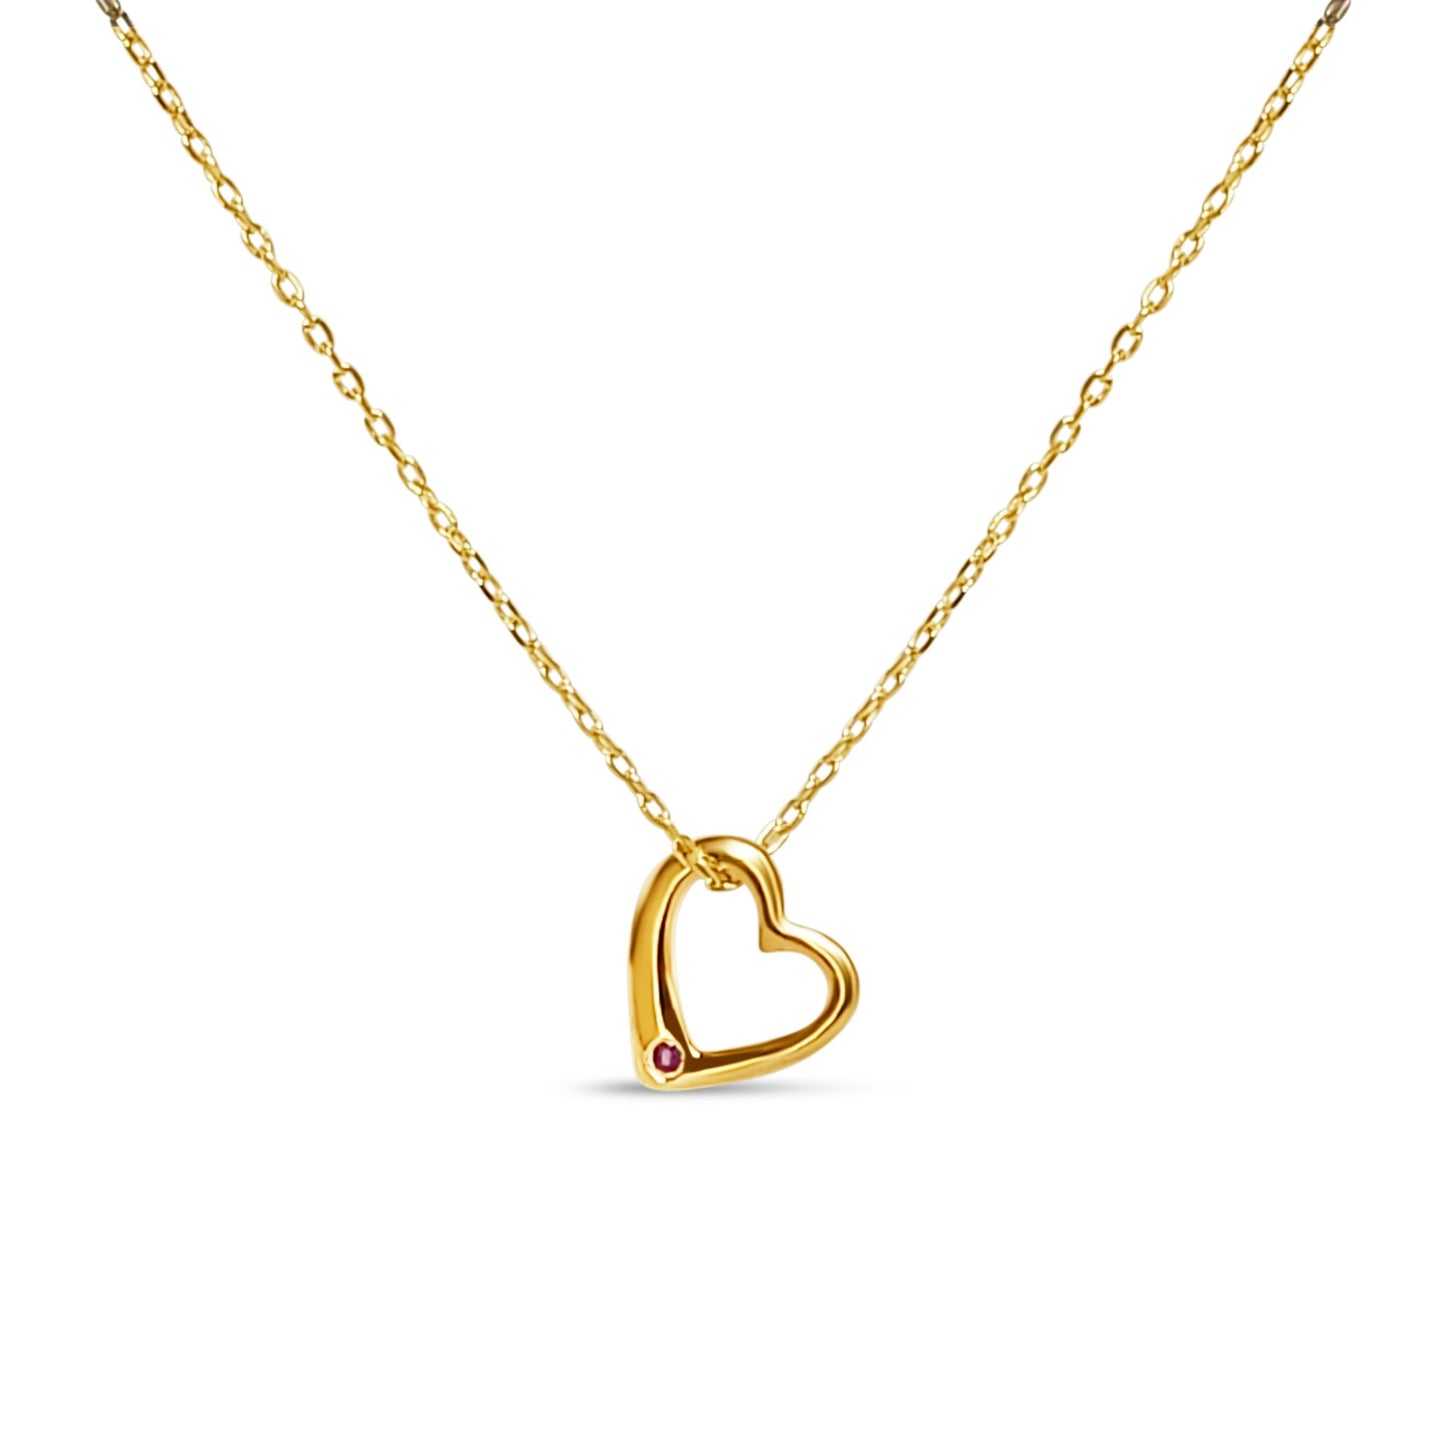 Gold heart pendant necklace with a precious ruby gemstone for a touch of elegance.